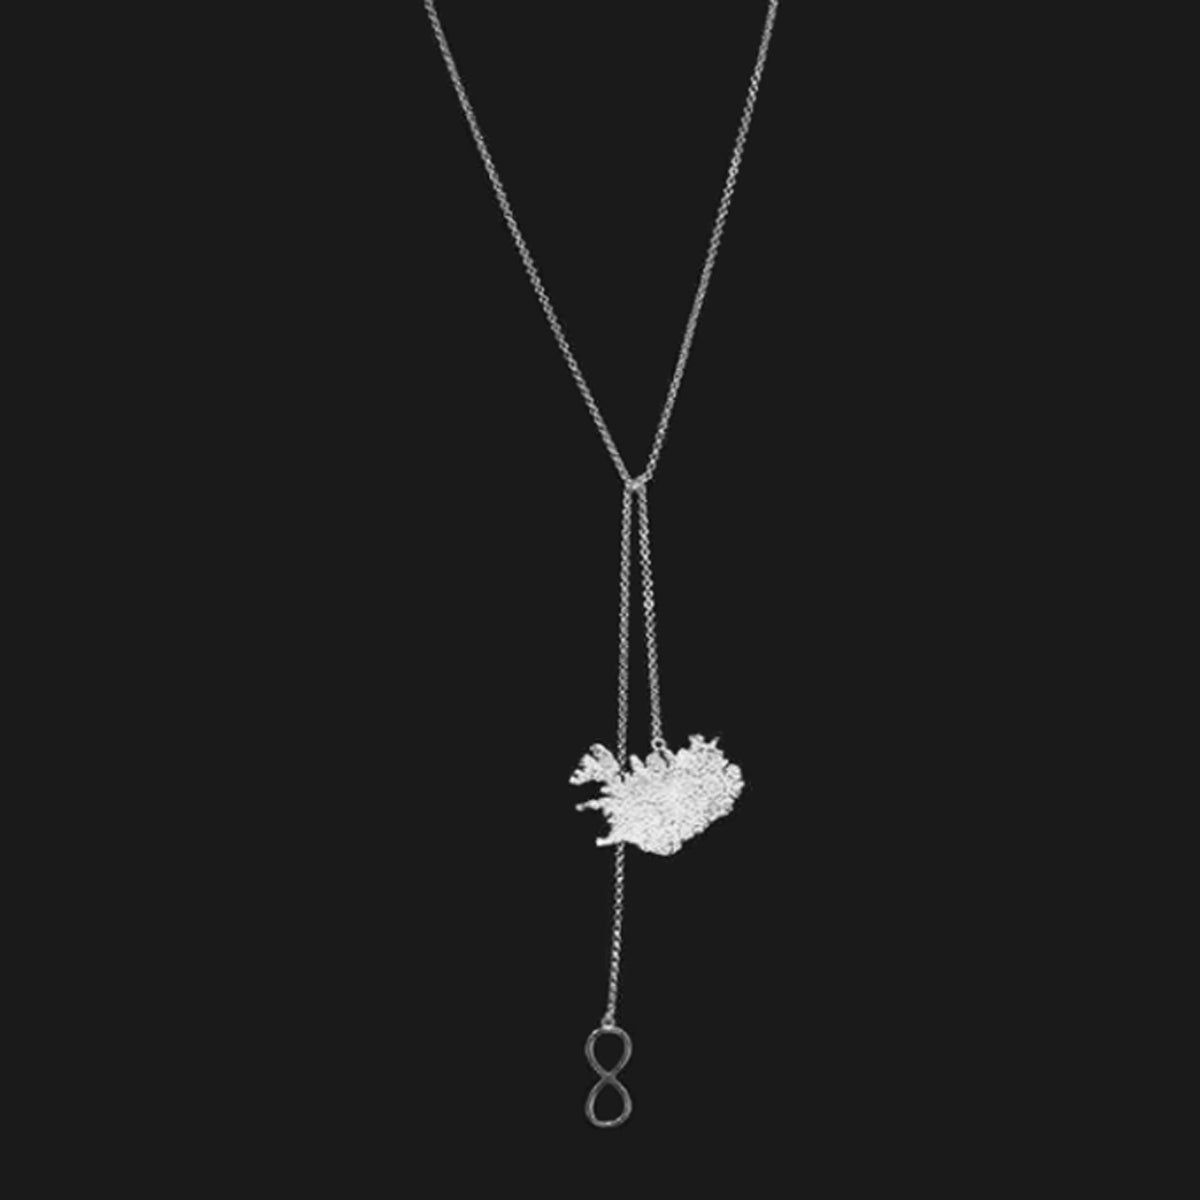 Iceland - Silver Necklace